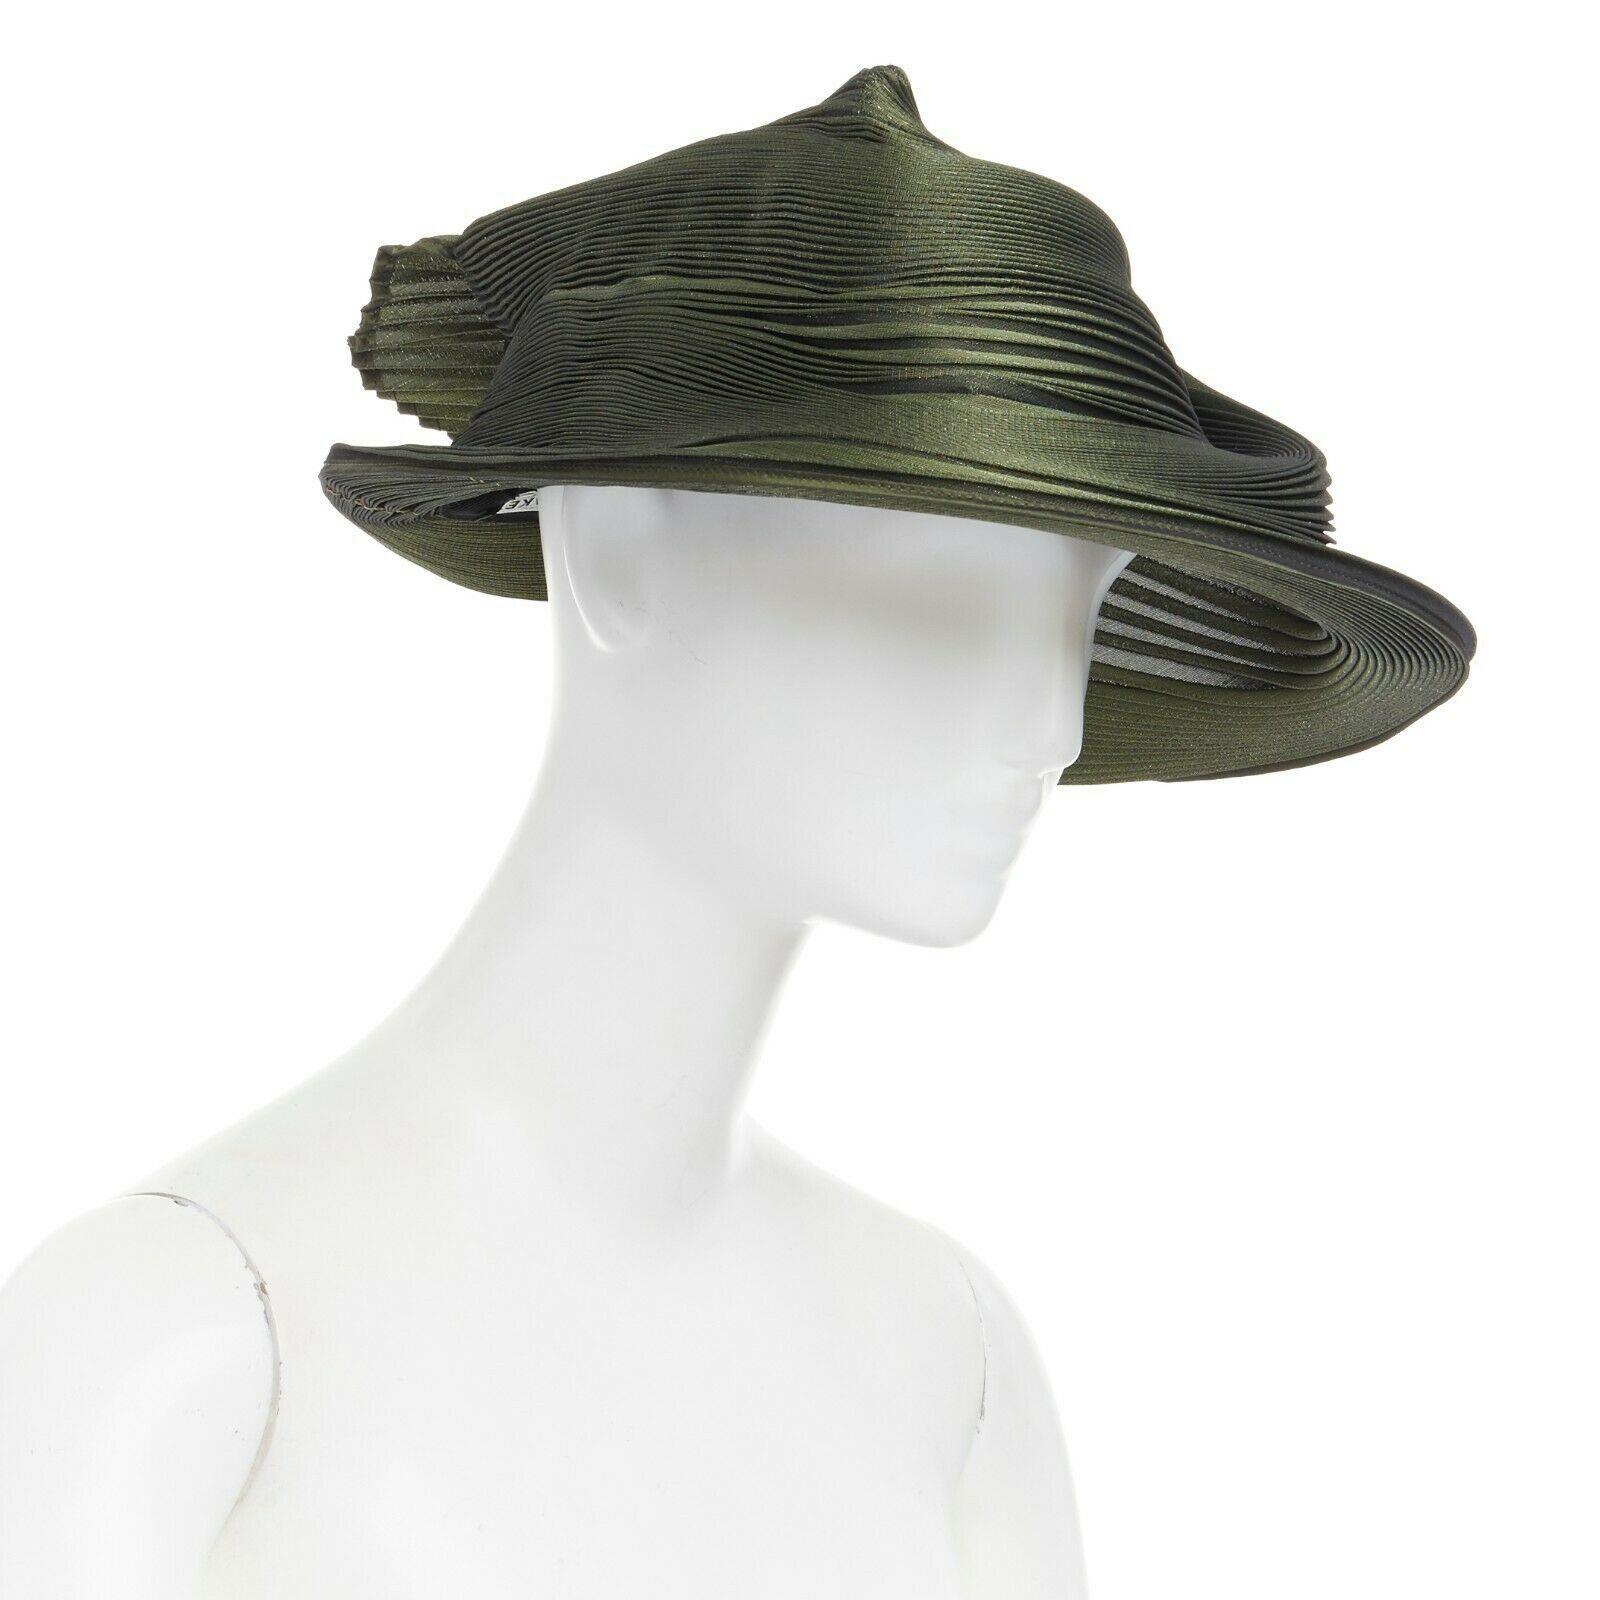 runway ISSEY MIYAKE SS15 orbital green structure pleated fascinator hat rare
ISSEY MIYAKE
EXTREMELY RARE AND UNIQUE DESIGN
Green pleated structural hat. Orbital brimmed design. 
Pleats are slightly moldable to different shapes. Can wear back to